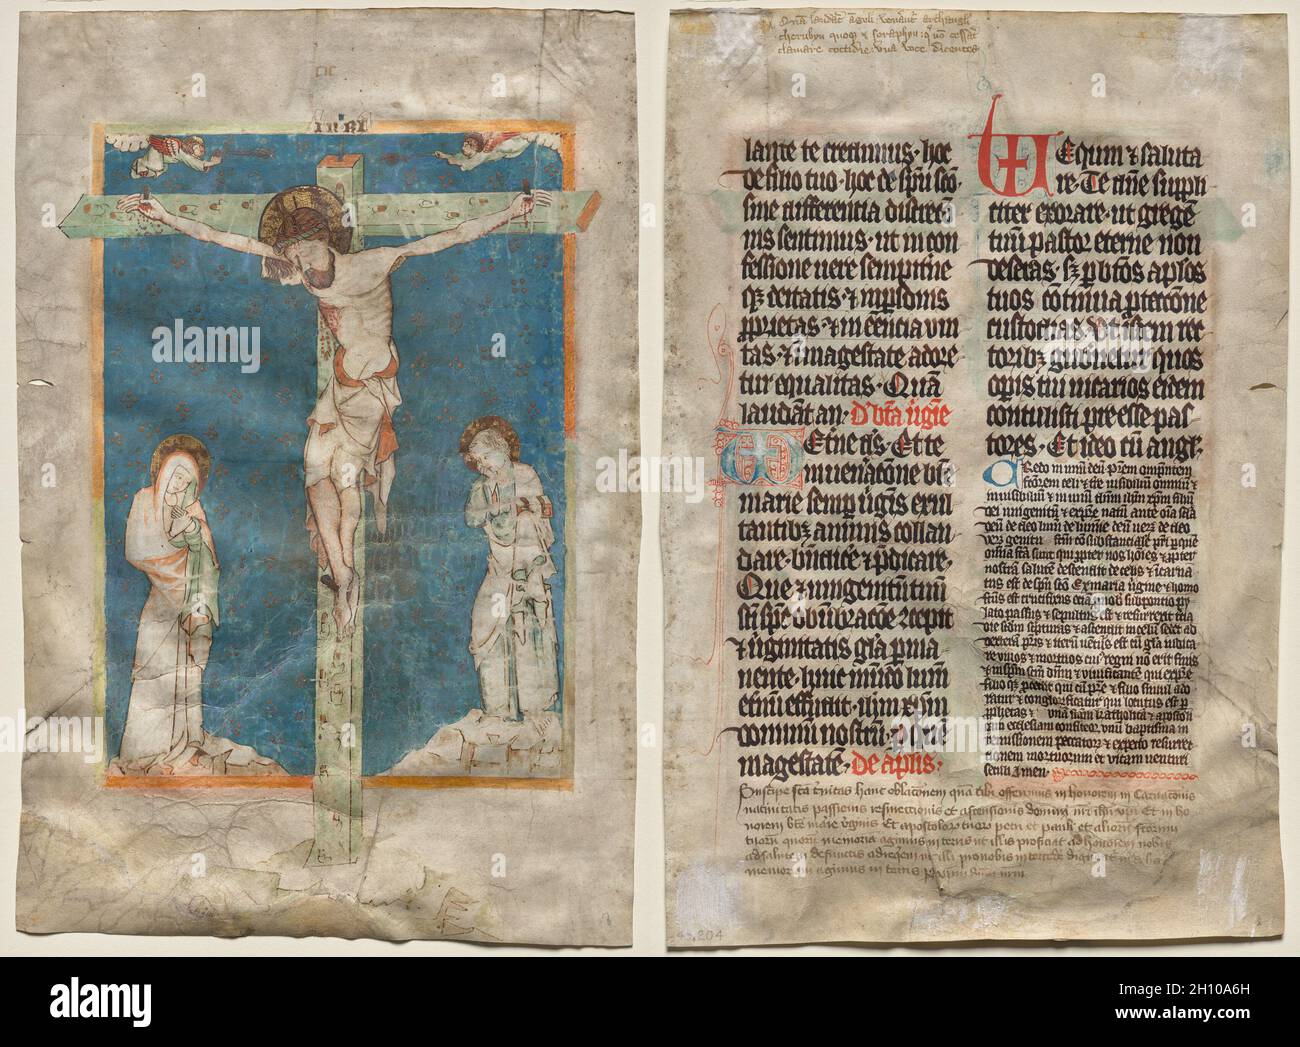 Leaf from a Missal: The Crucifixion (recto) and Text (verso), c. 1330-40. Bohemia. Ink, tempera, and gold leaf on parchment; sheet: 35.4 x 23.5 cm (13 15/16 x 9 1/4 in.).  The crucified Christ was a central theme of medieval visual art. Each period set its own artistic and iconographic priorities, depending on the function and context of the works. For example, the dead Christ with his head bowed, the side wound dripping with blood, and the richly designed loincloth is characteristic of the 1300s. This miniature is from Bohemia (present-day Czech Republic and Slovakia), with its capital, Pragu Stock Photo